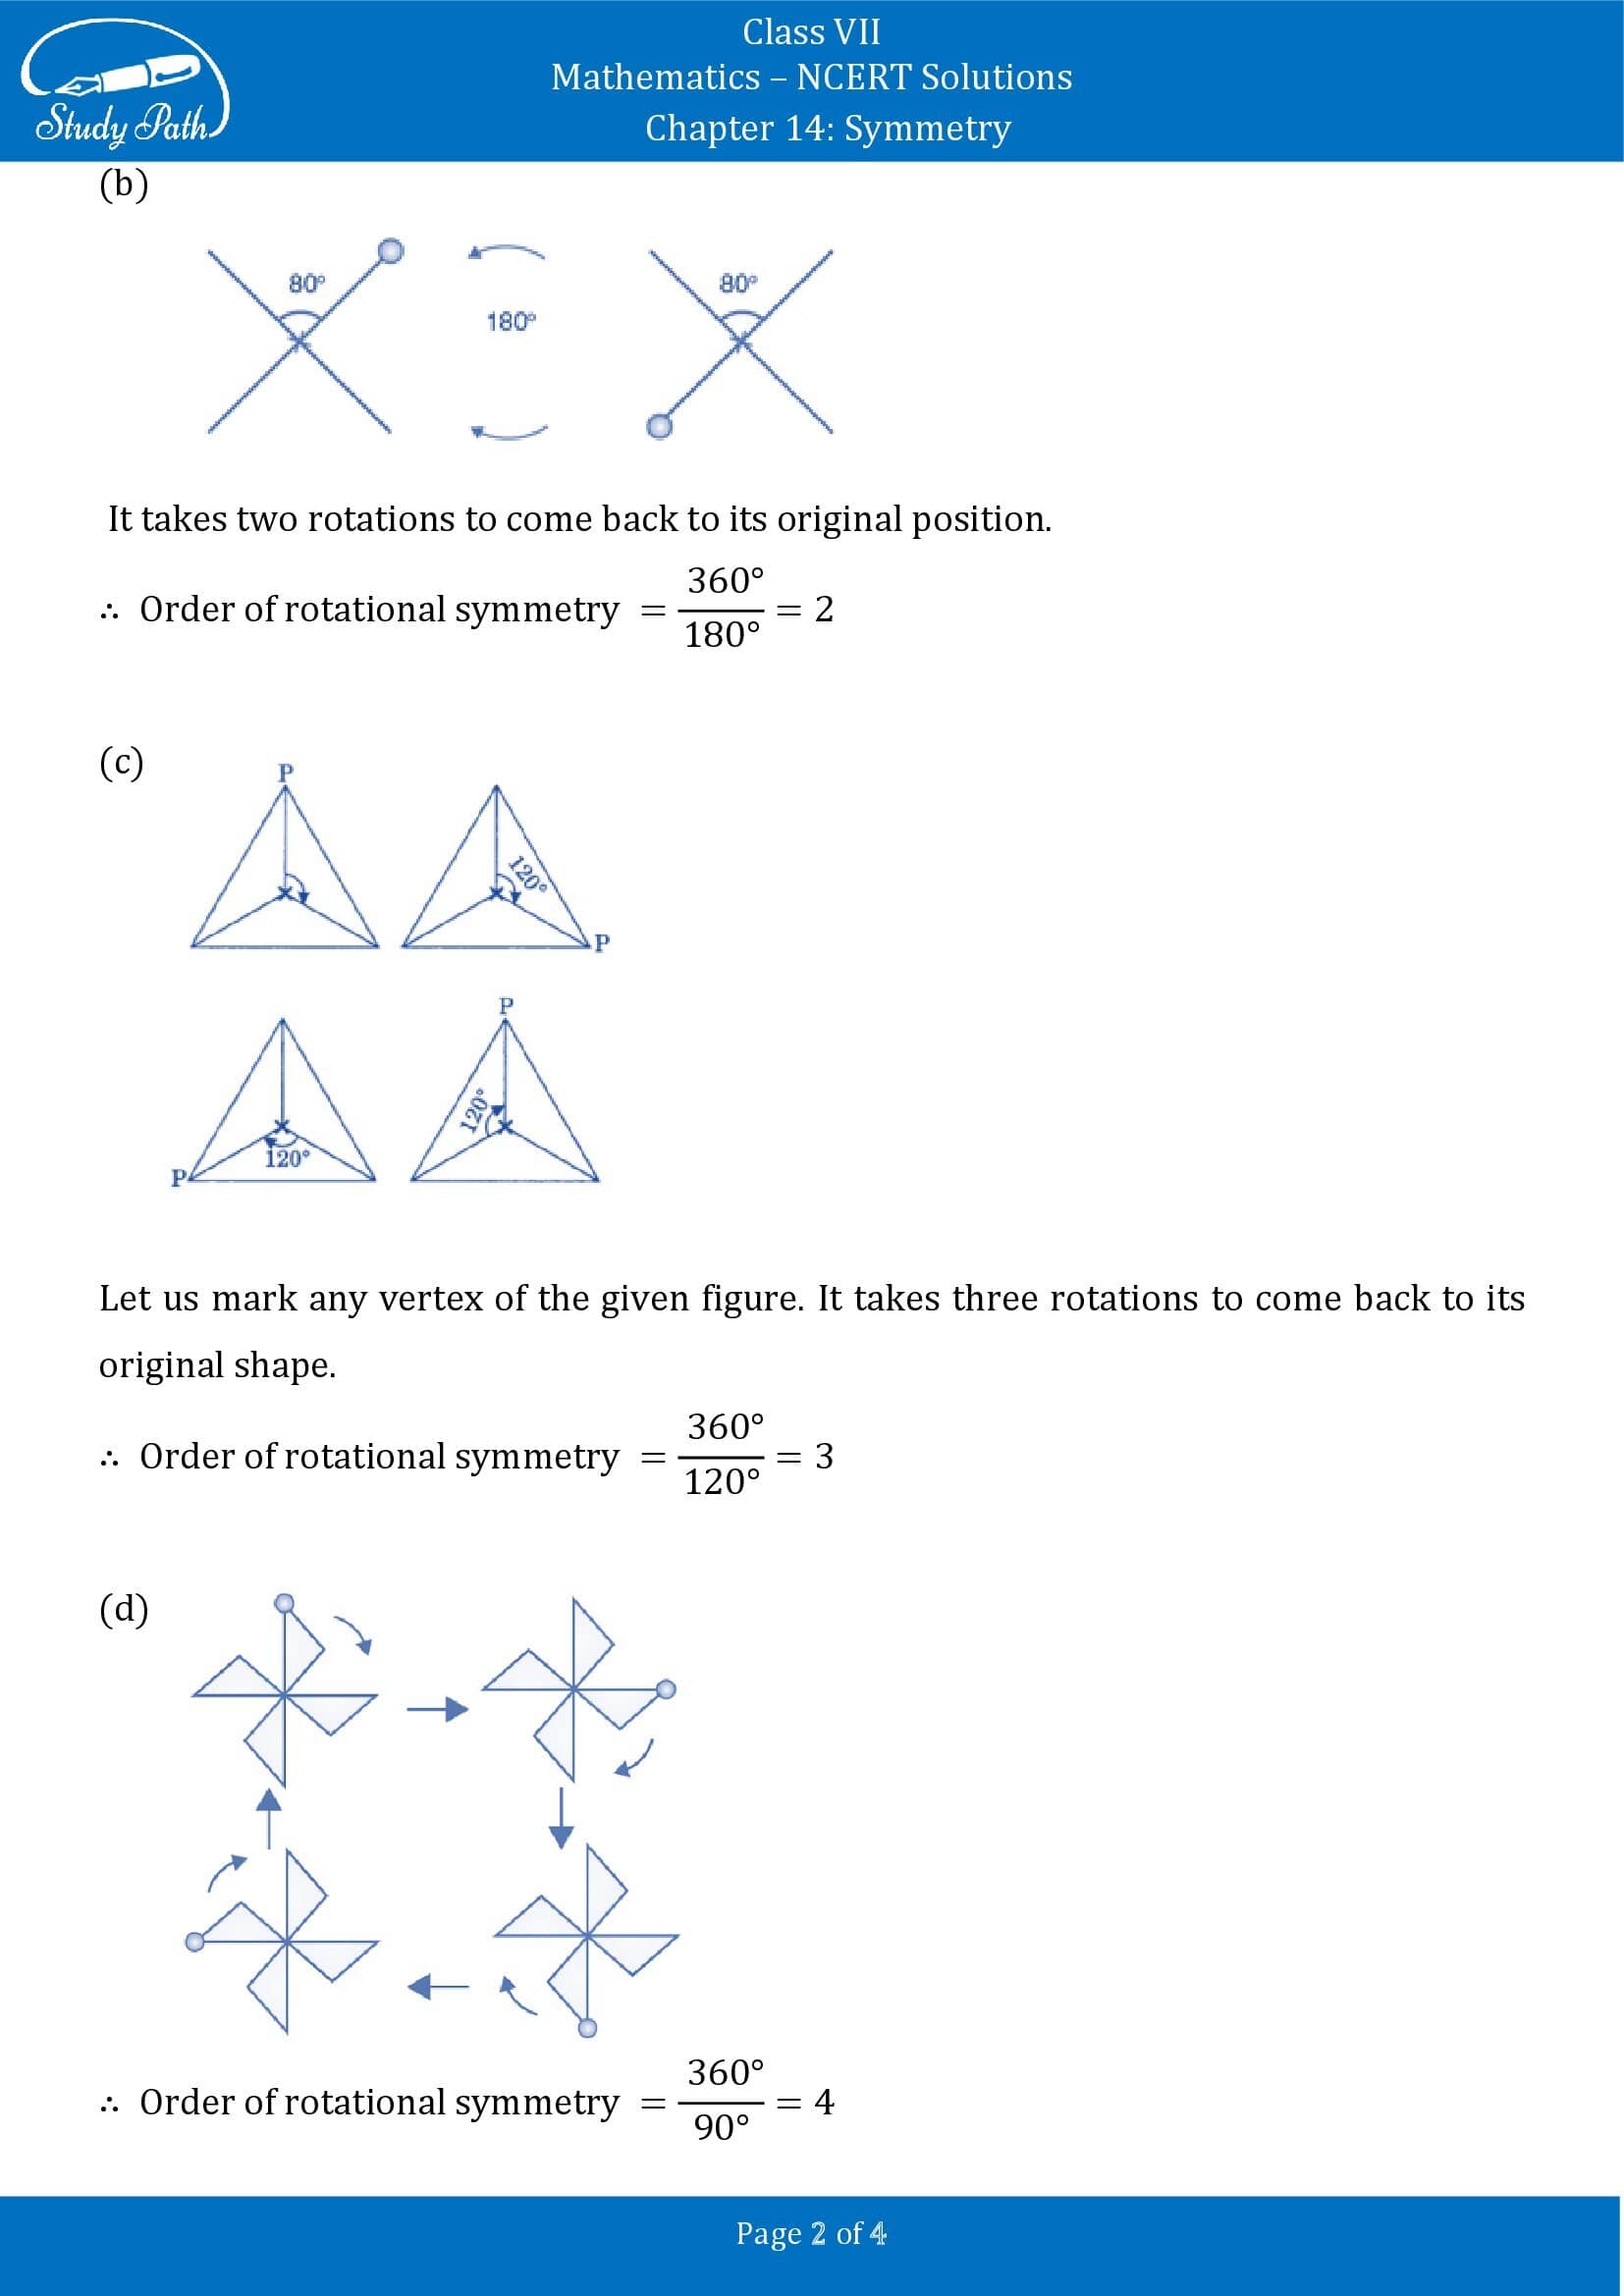 NCERT Solutions for Class 7 Maths Chapter 14 Symmetry Exercise 14.2 00002